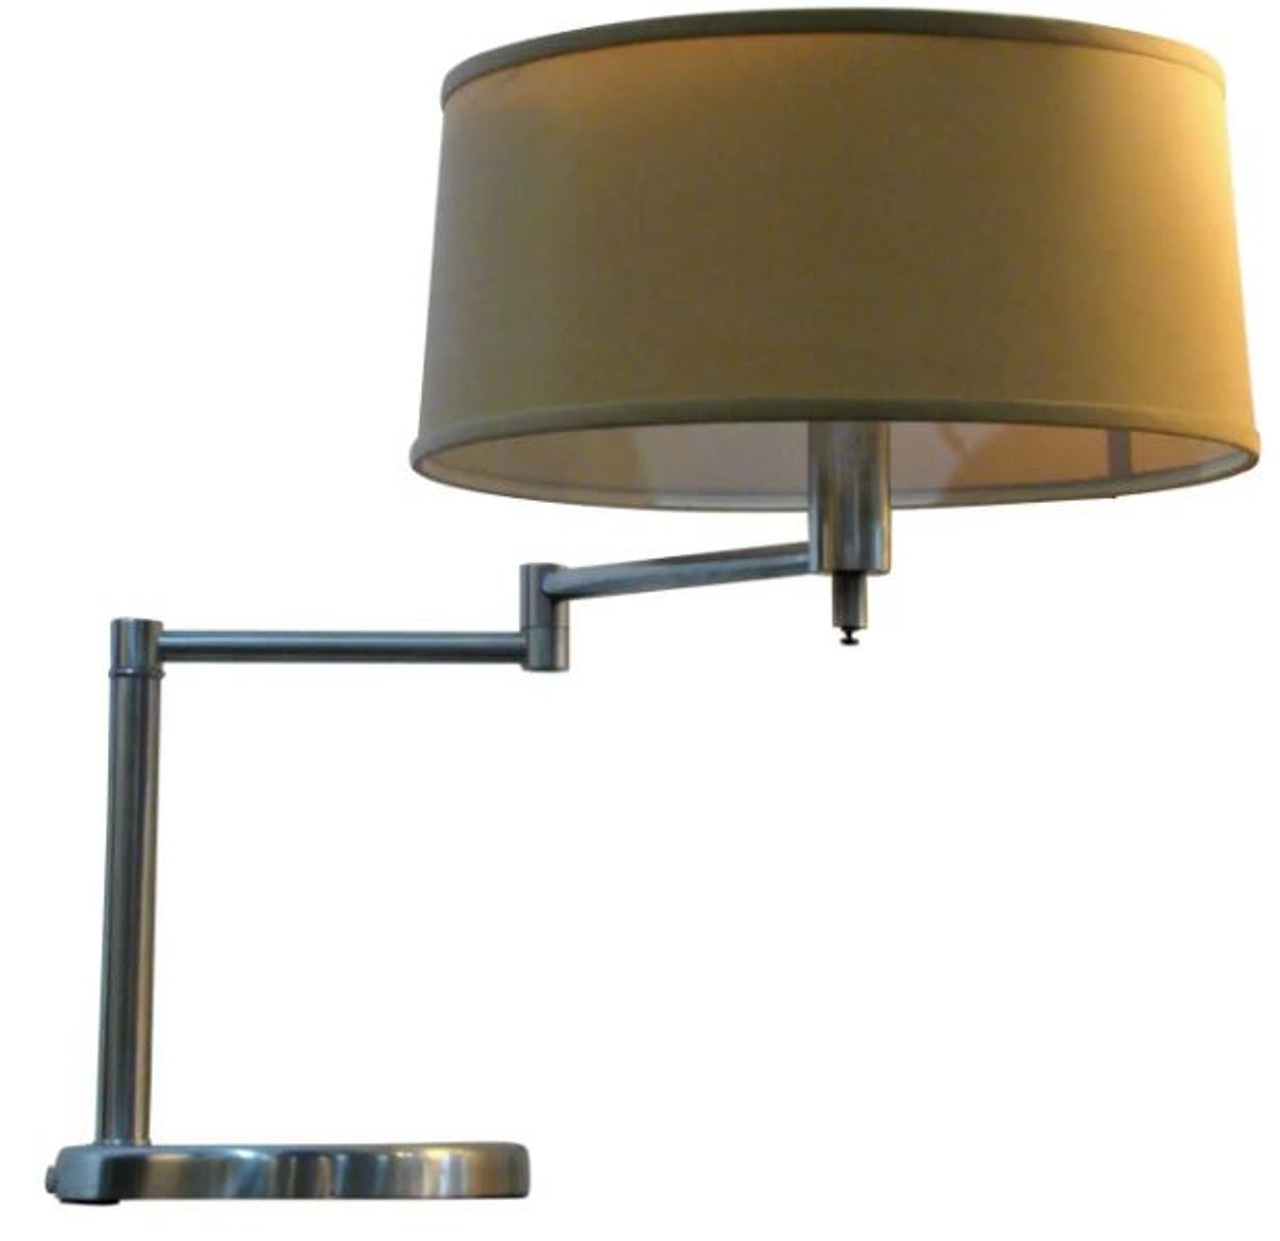 VINTAGE Swing Arm Lamp Mfg. by Laurel Lamps a Classic Von Nessen Design - Modern + Contemporary Furniture and Vintage | Mod livin'